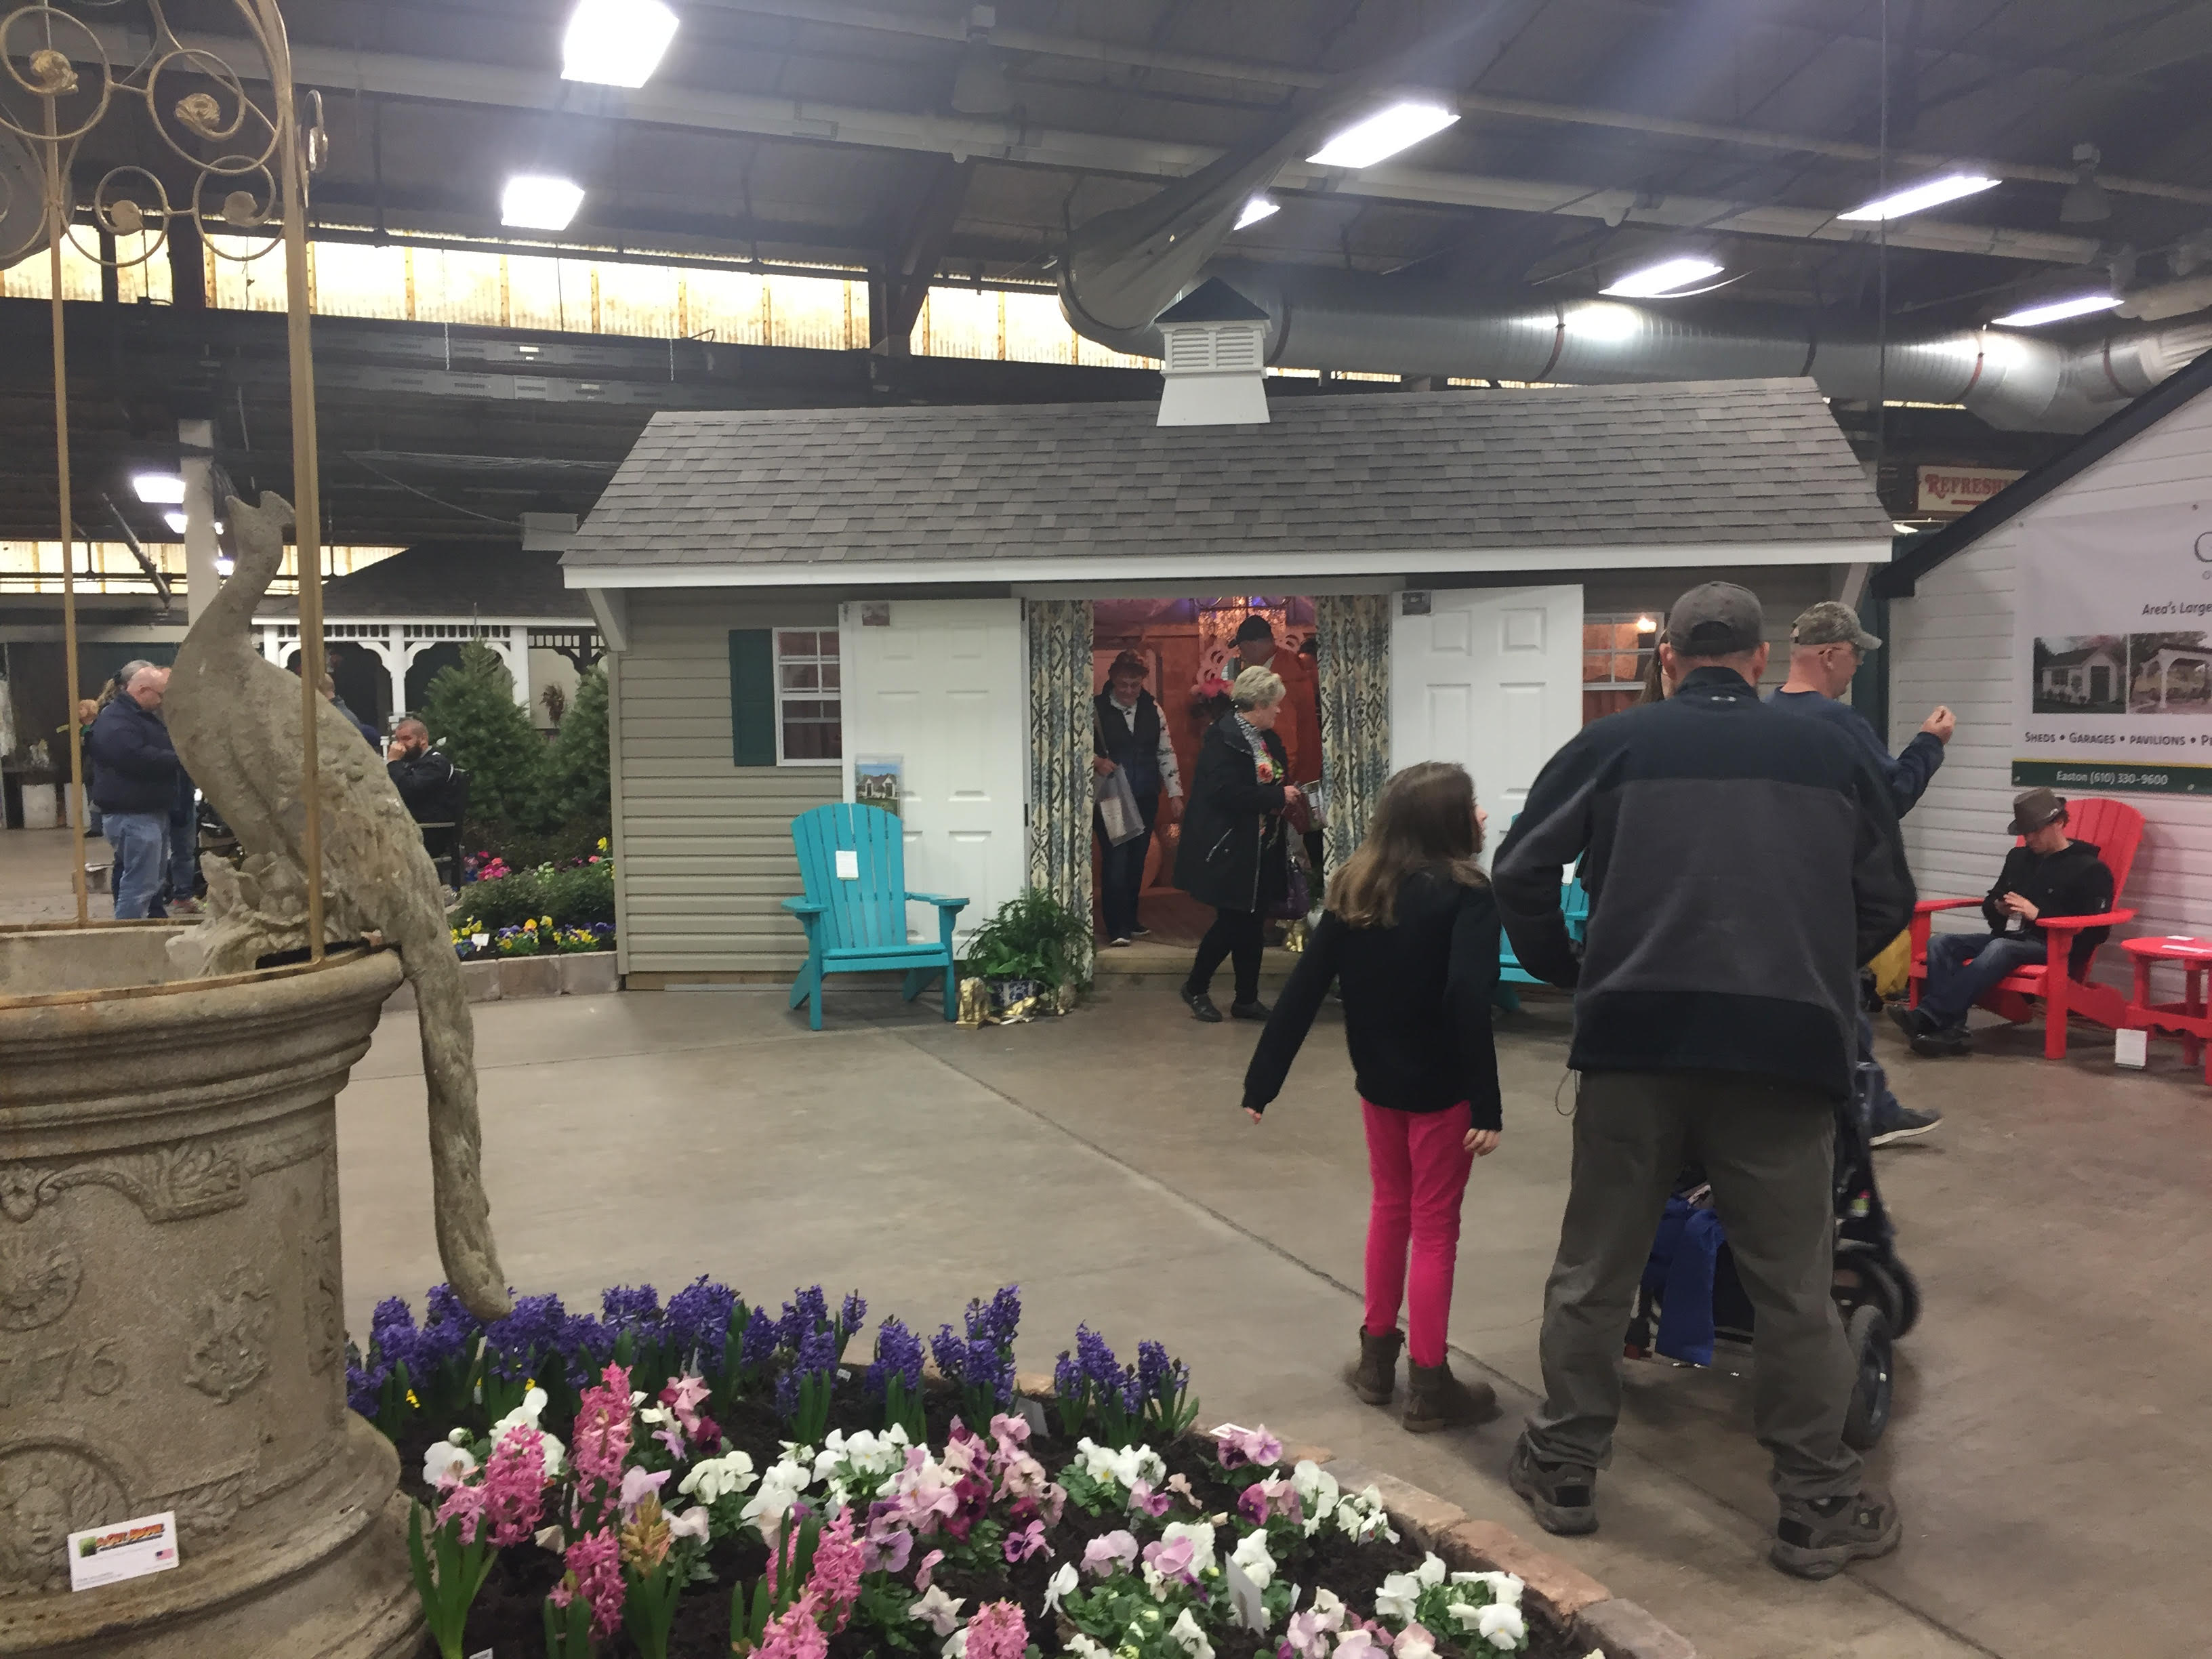 2020 Lehigh Valley Flower Show- “She Shed”